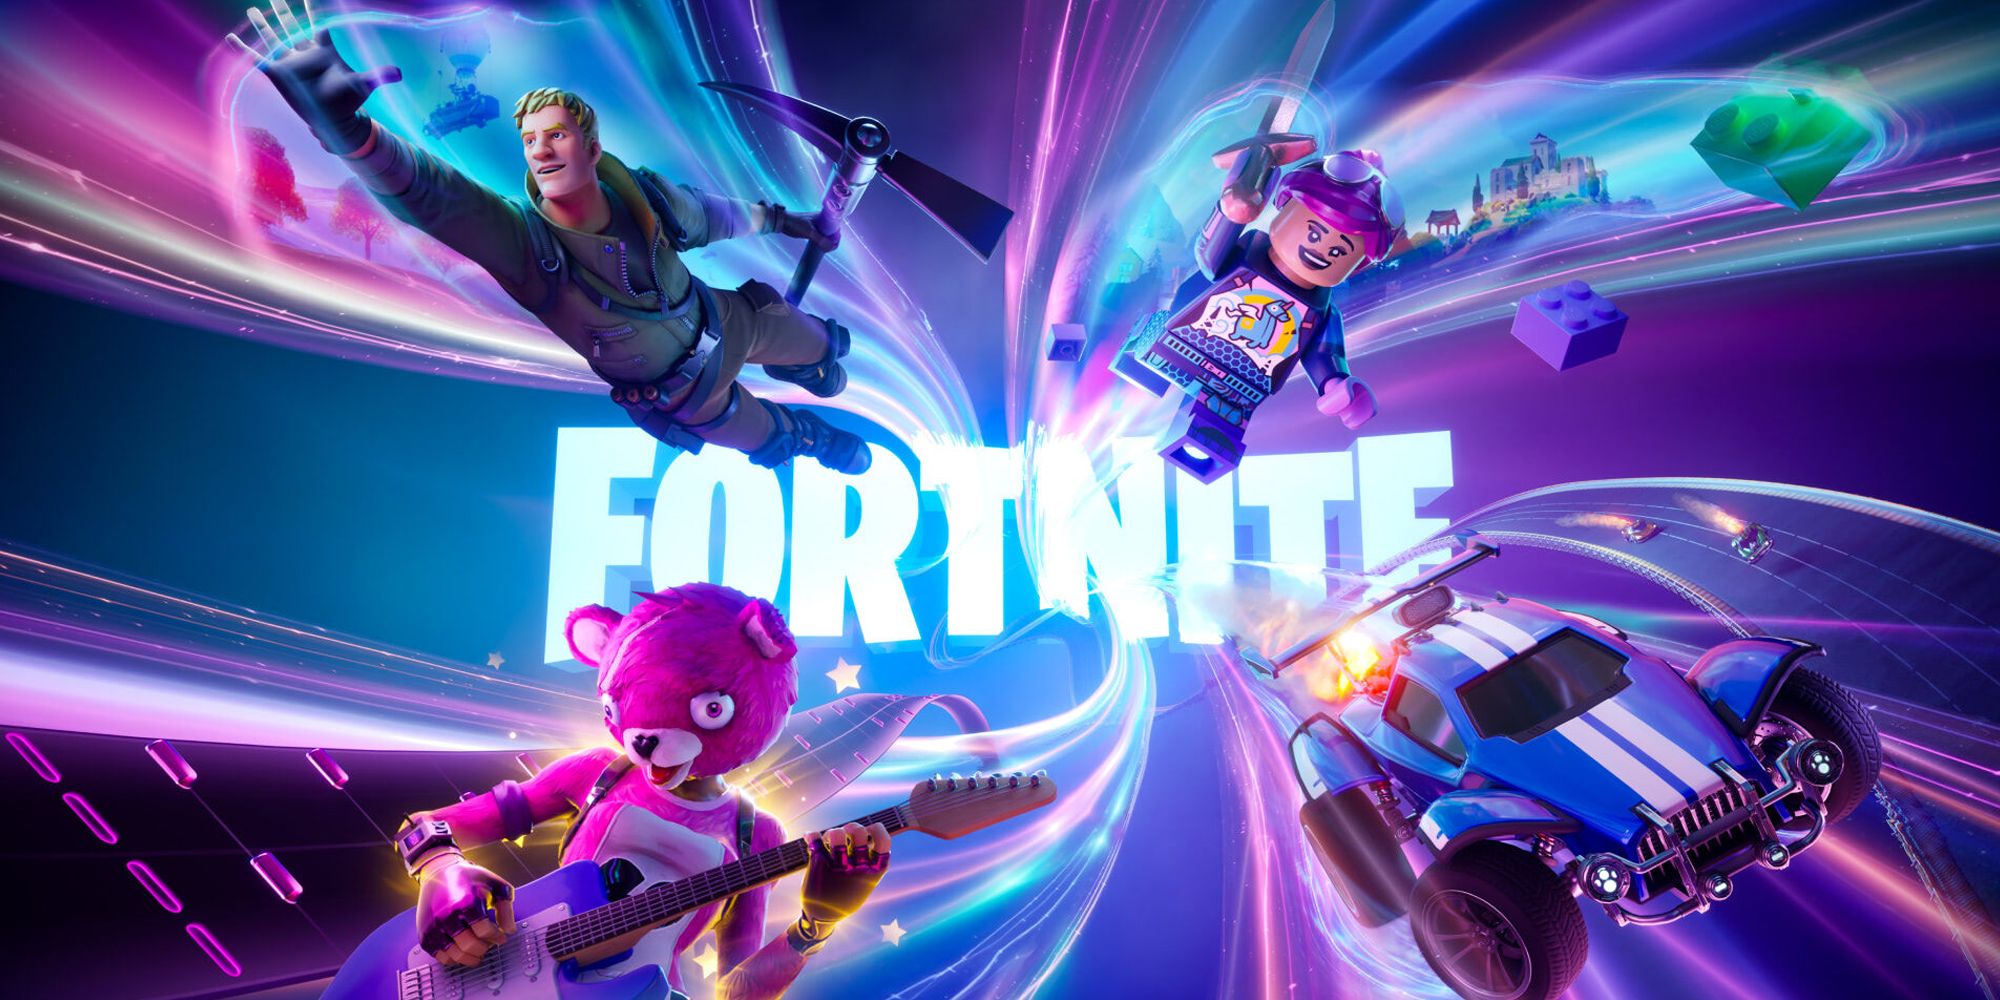 chapter 4 season 1 key artwork for fortnite showing three characyers and a car